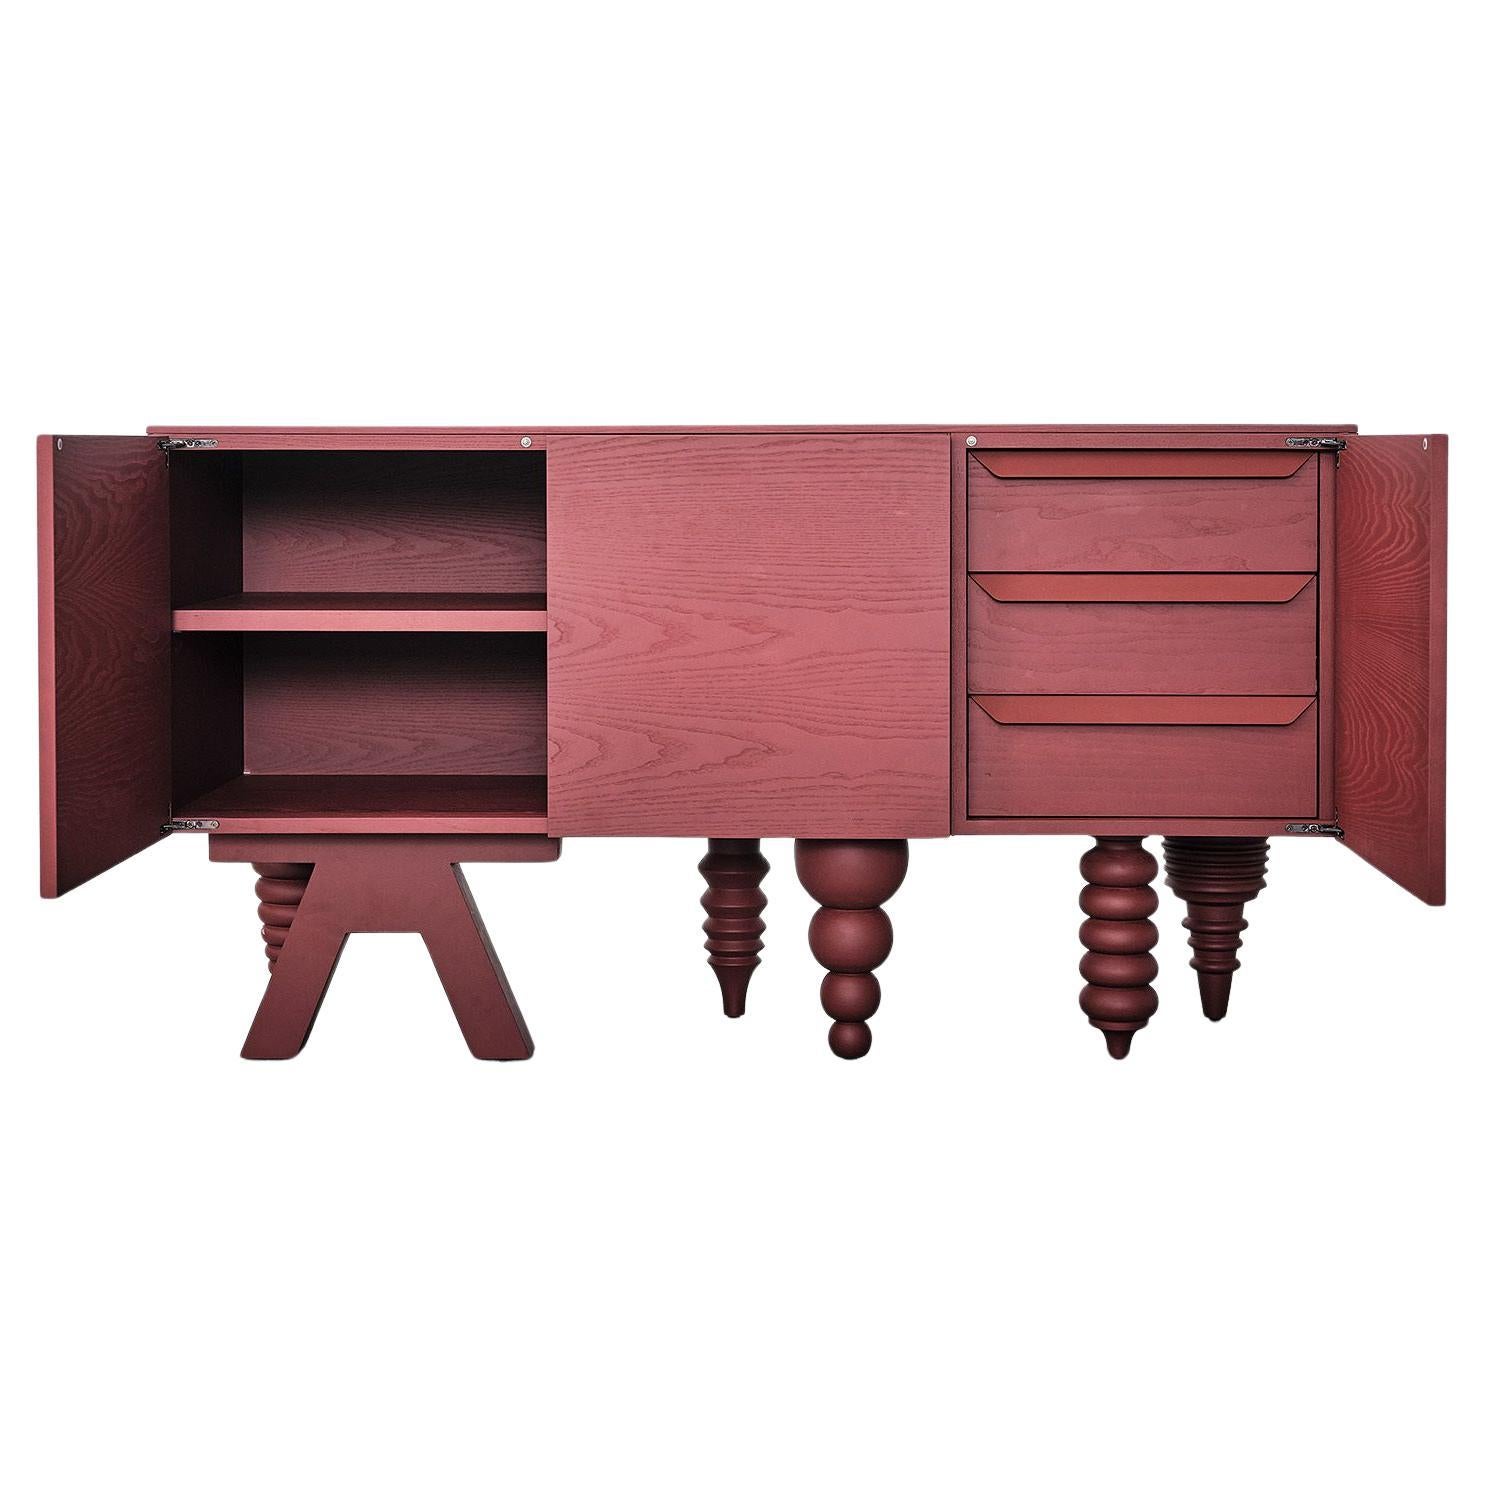 2M Multileg Cabinet in Red Ash Wood by Jaime Hayon for BD Barcelona